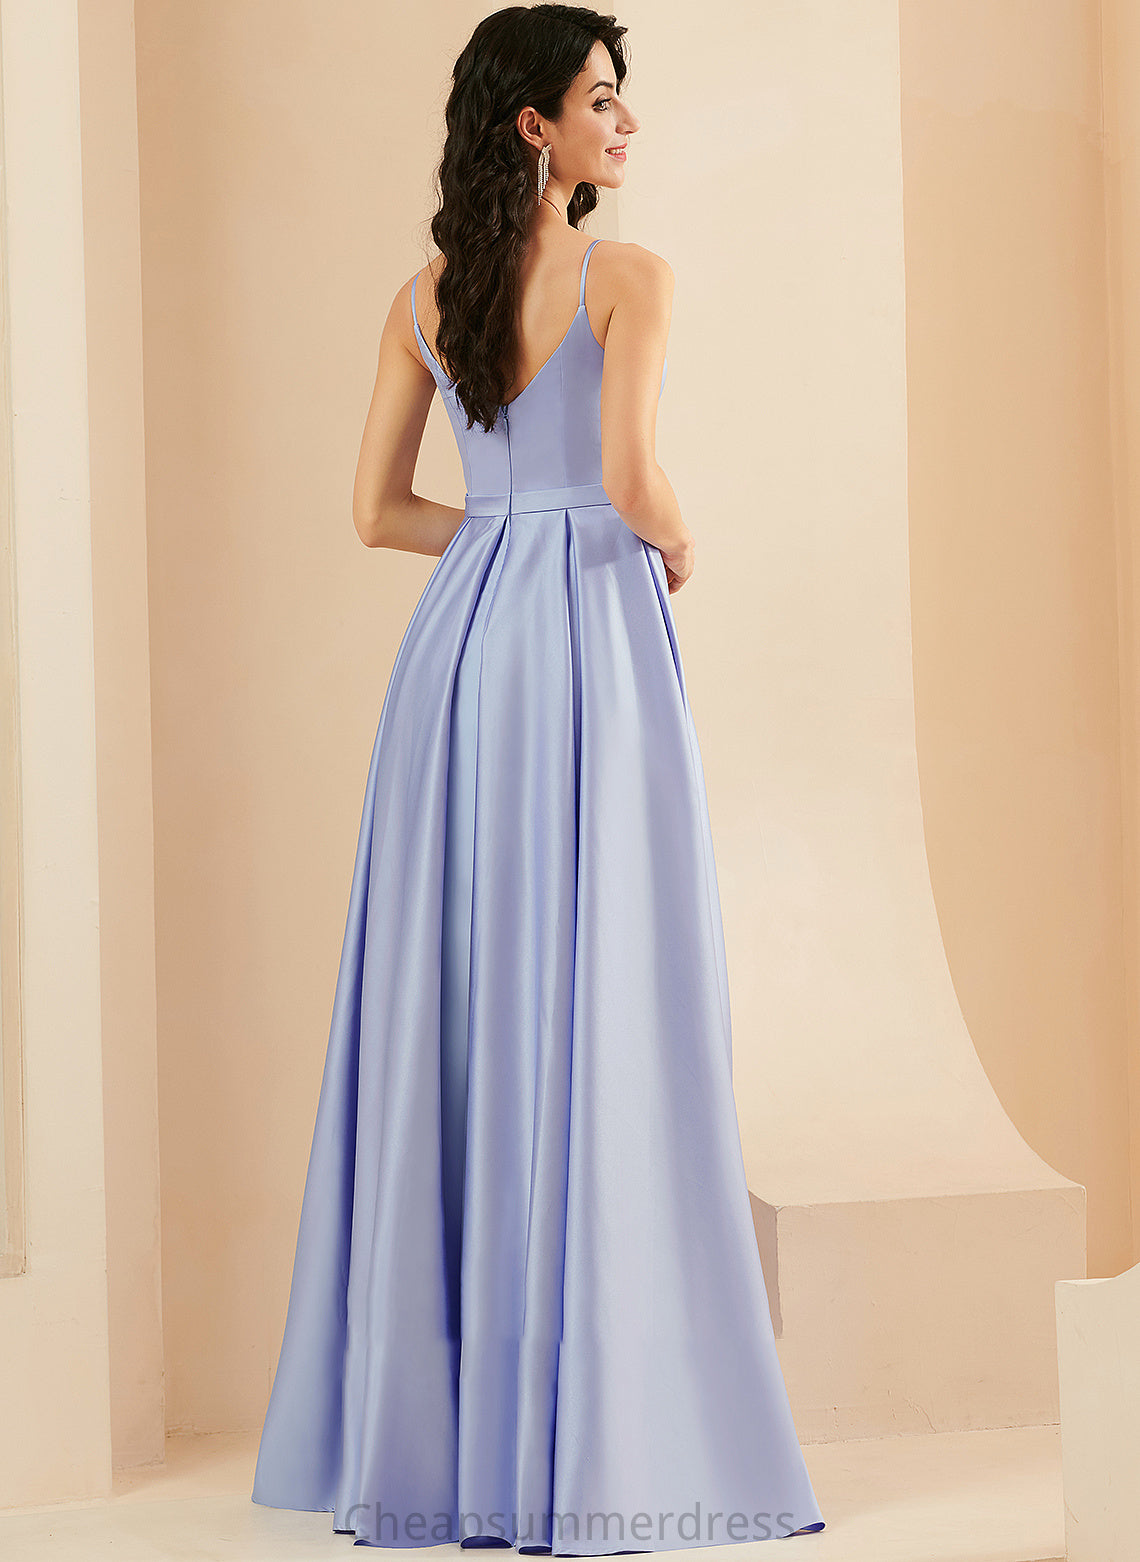 Satin Front Floor-Length Sweetheart With Rhianna Prom Dresses Pockets Split Ball-Gown/Princess